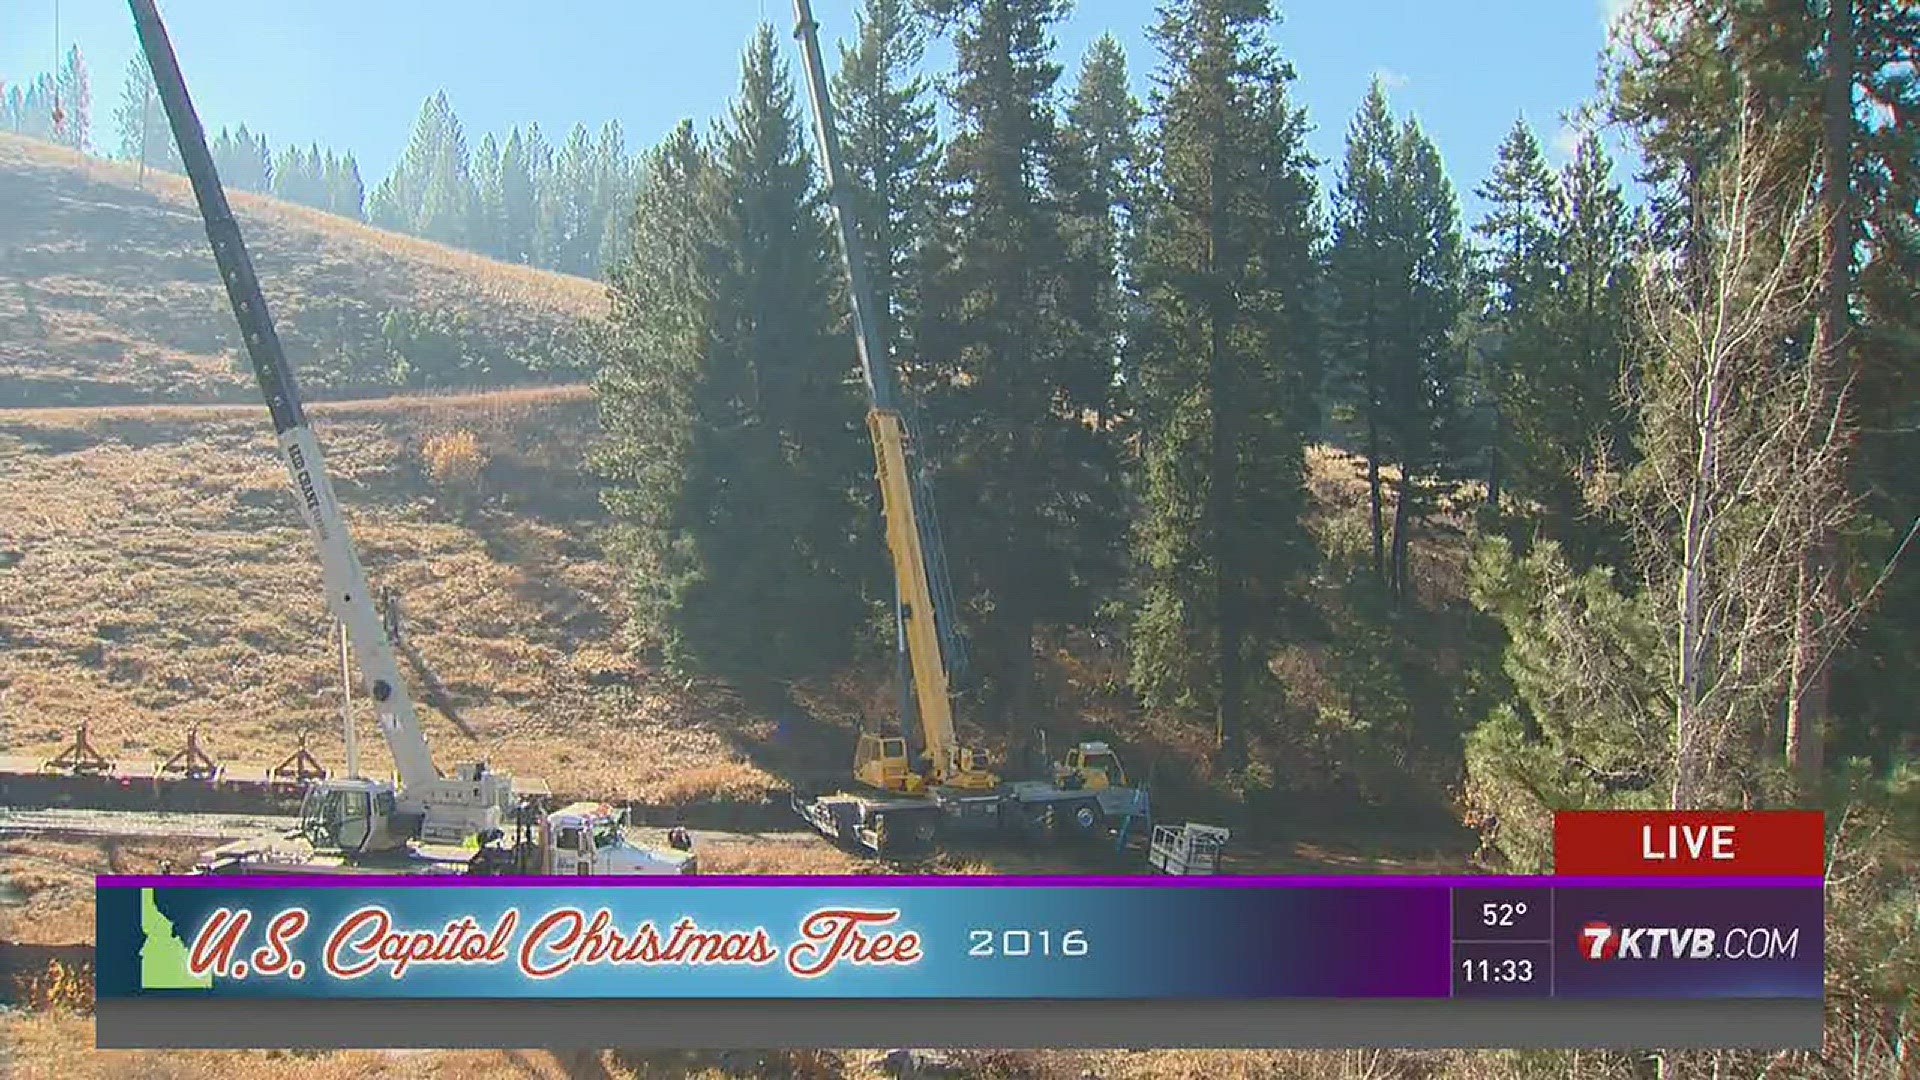 KTVB live coverage: The harvesting of the U.S. Capitol Christmas tree